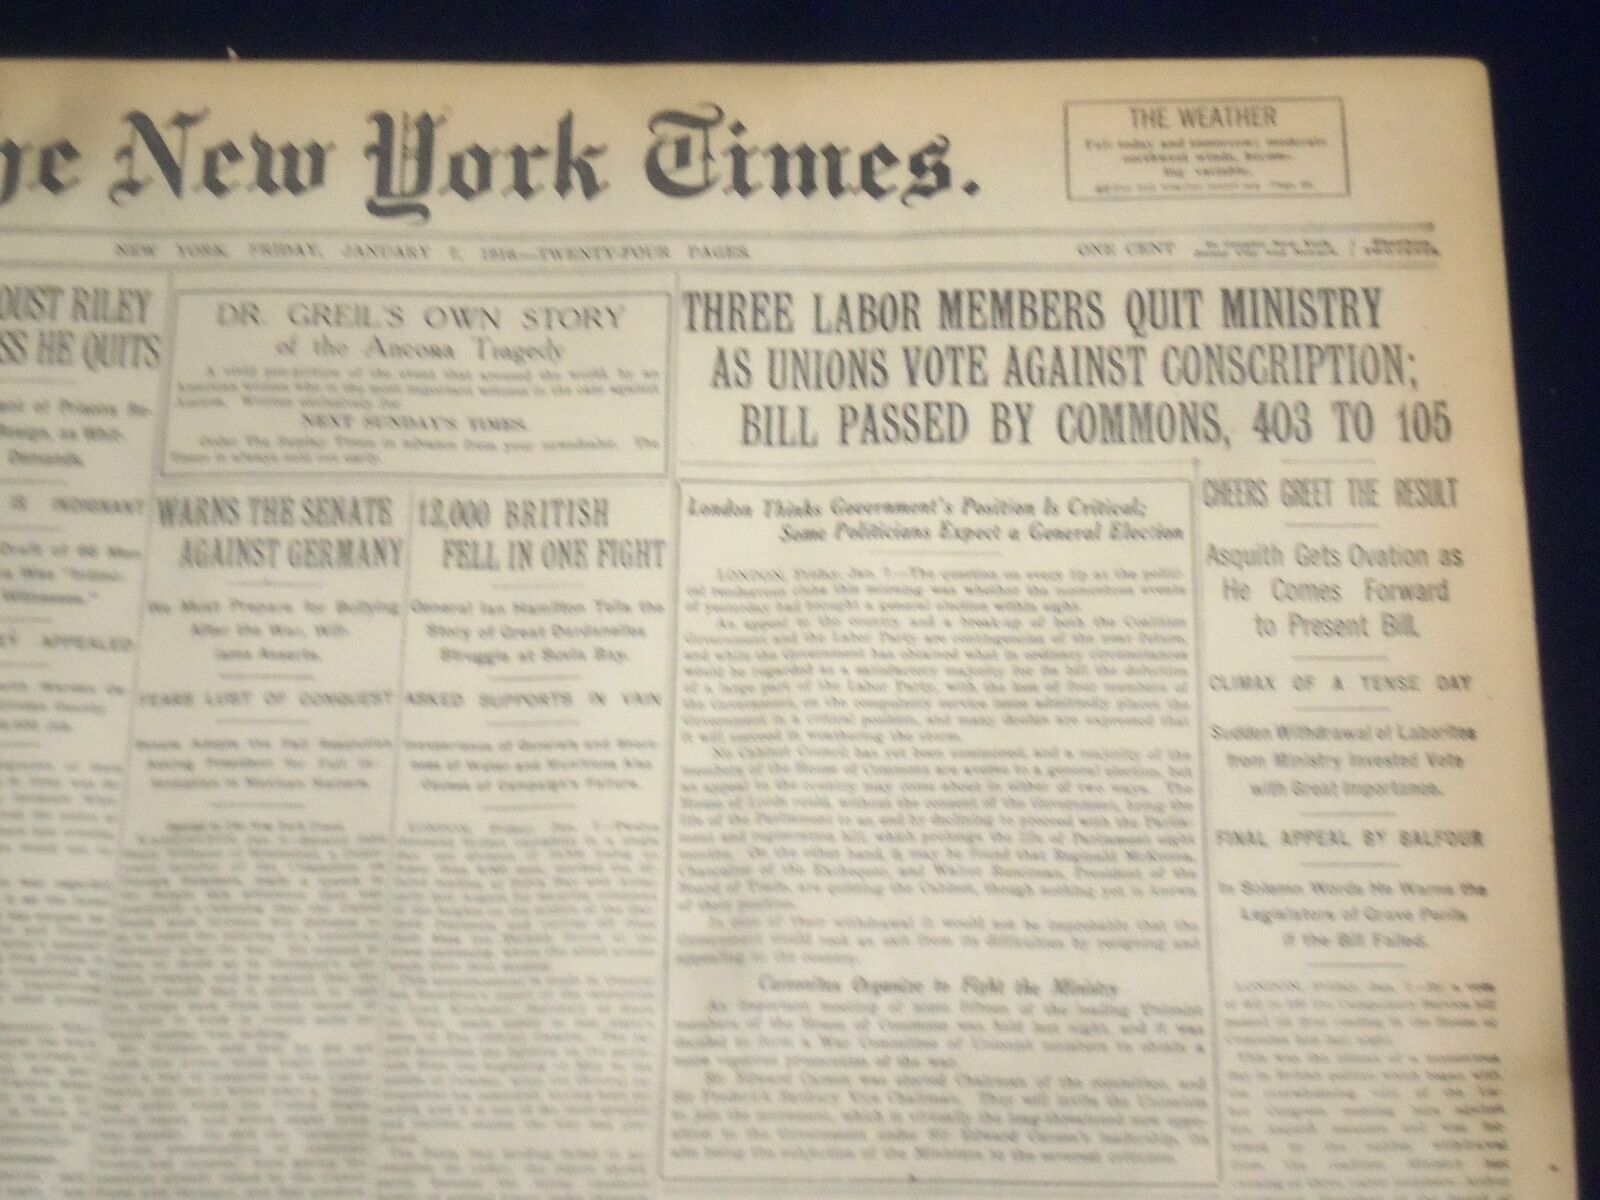 1916 JANUARY 7 NEW YORK TIMES - THREE LABOR MEMBERS QUIT MINISTRY - NT 9054